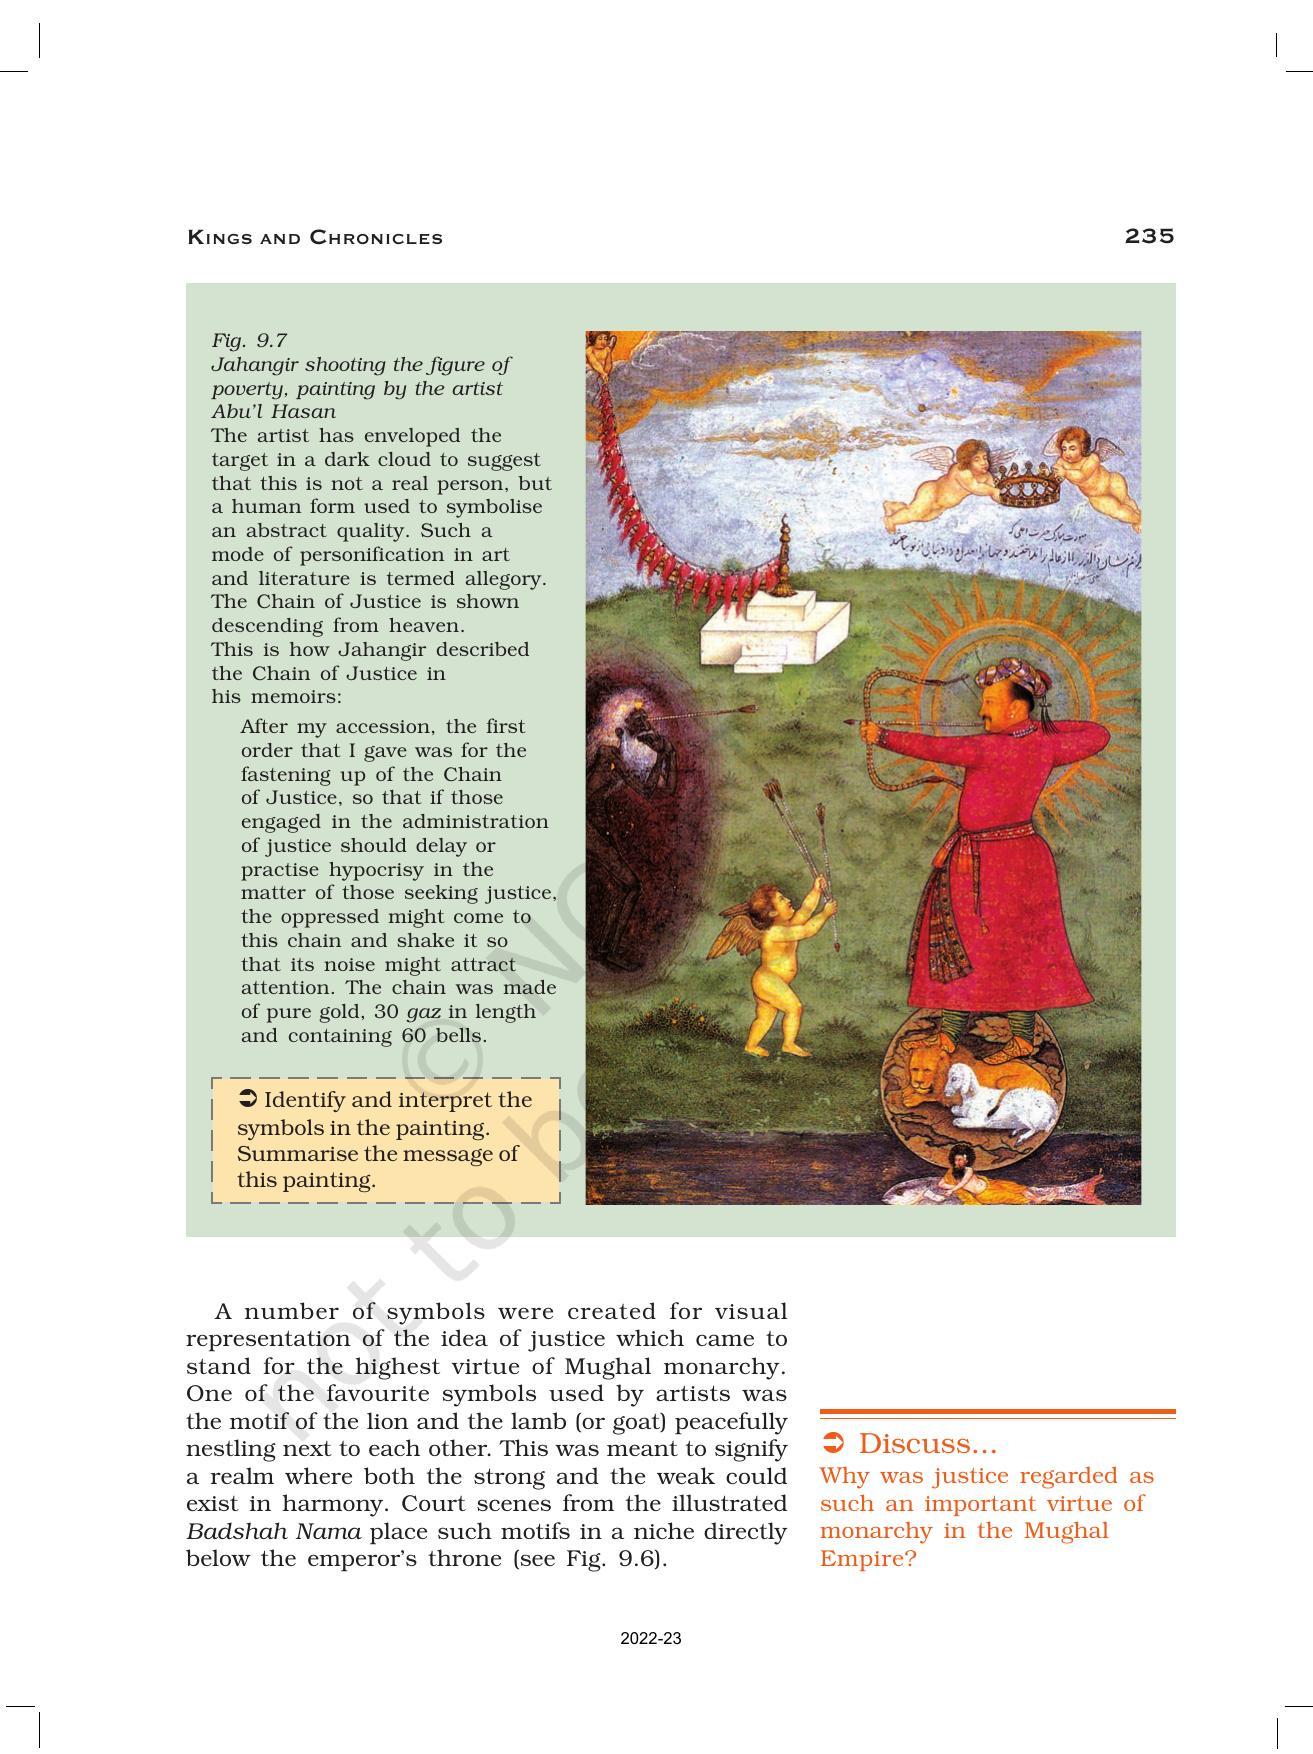 NCERT Book for Class 12 History (Part-II) Chapter 9 Kings and Chronicles - Page 12